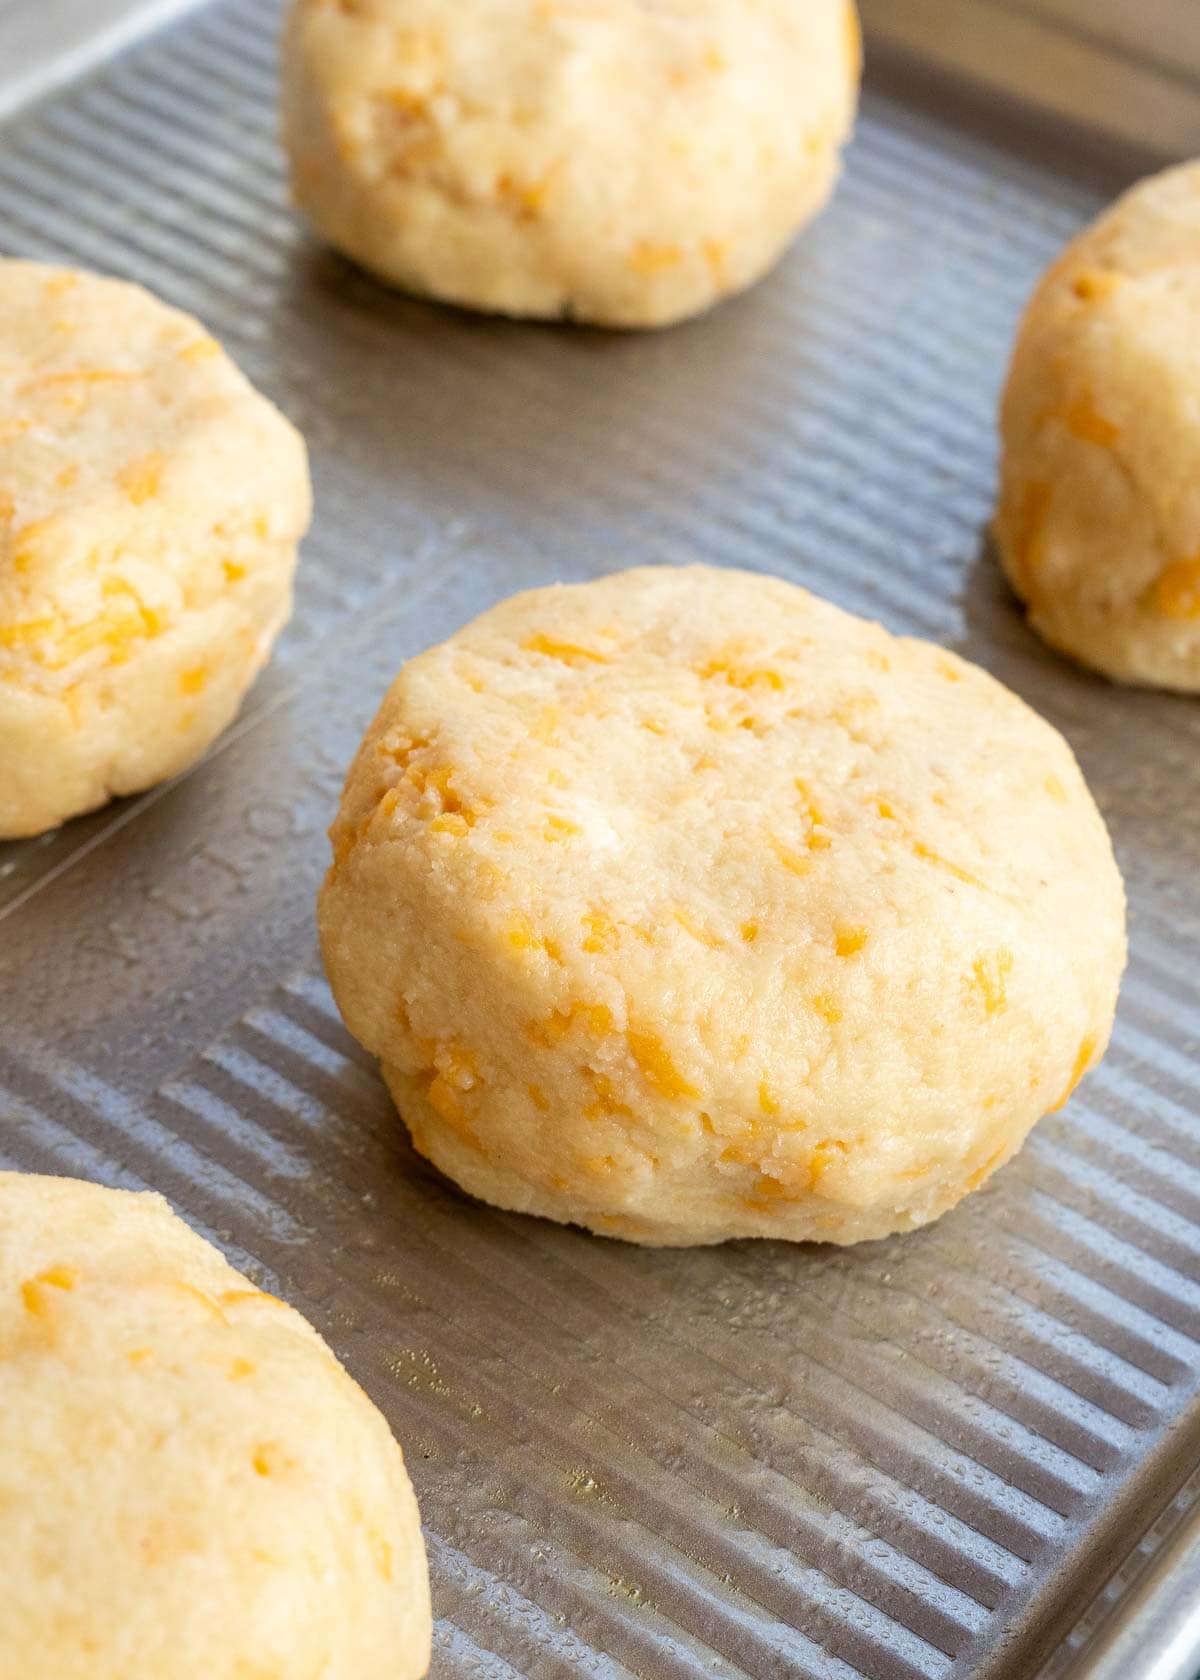 biscuits dough on a baking sheet